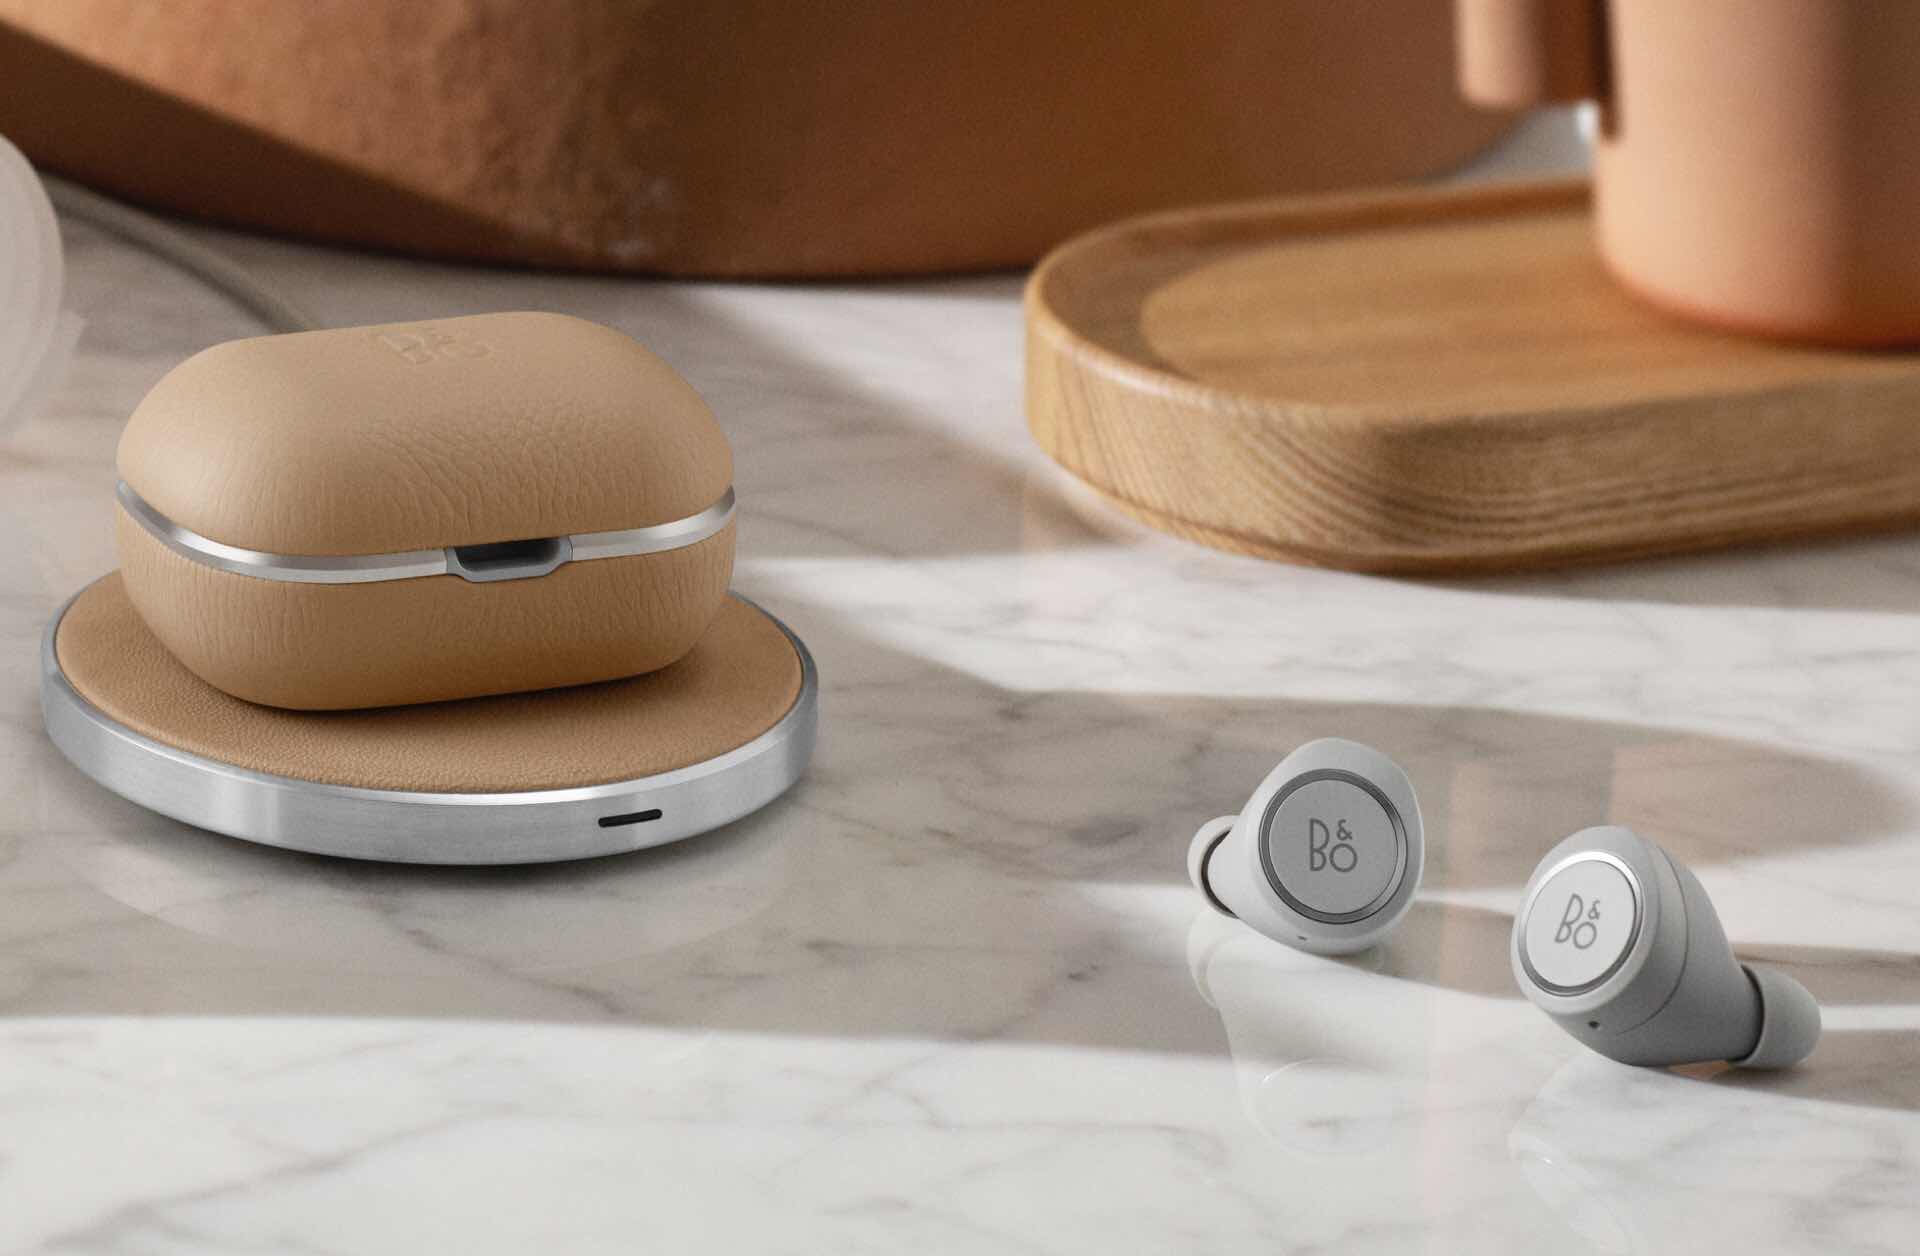 Louis Vuitton releases headphones to rival Apple's AirPods - but